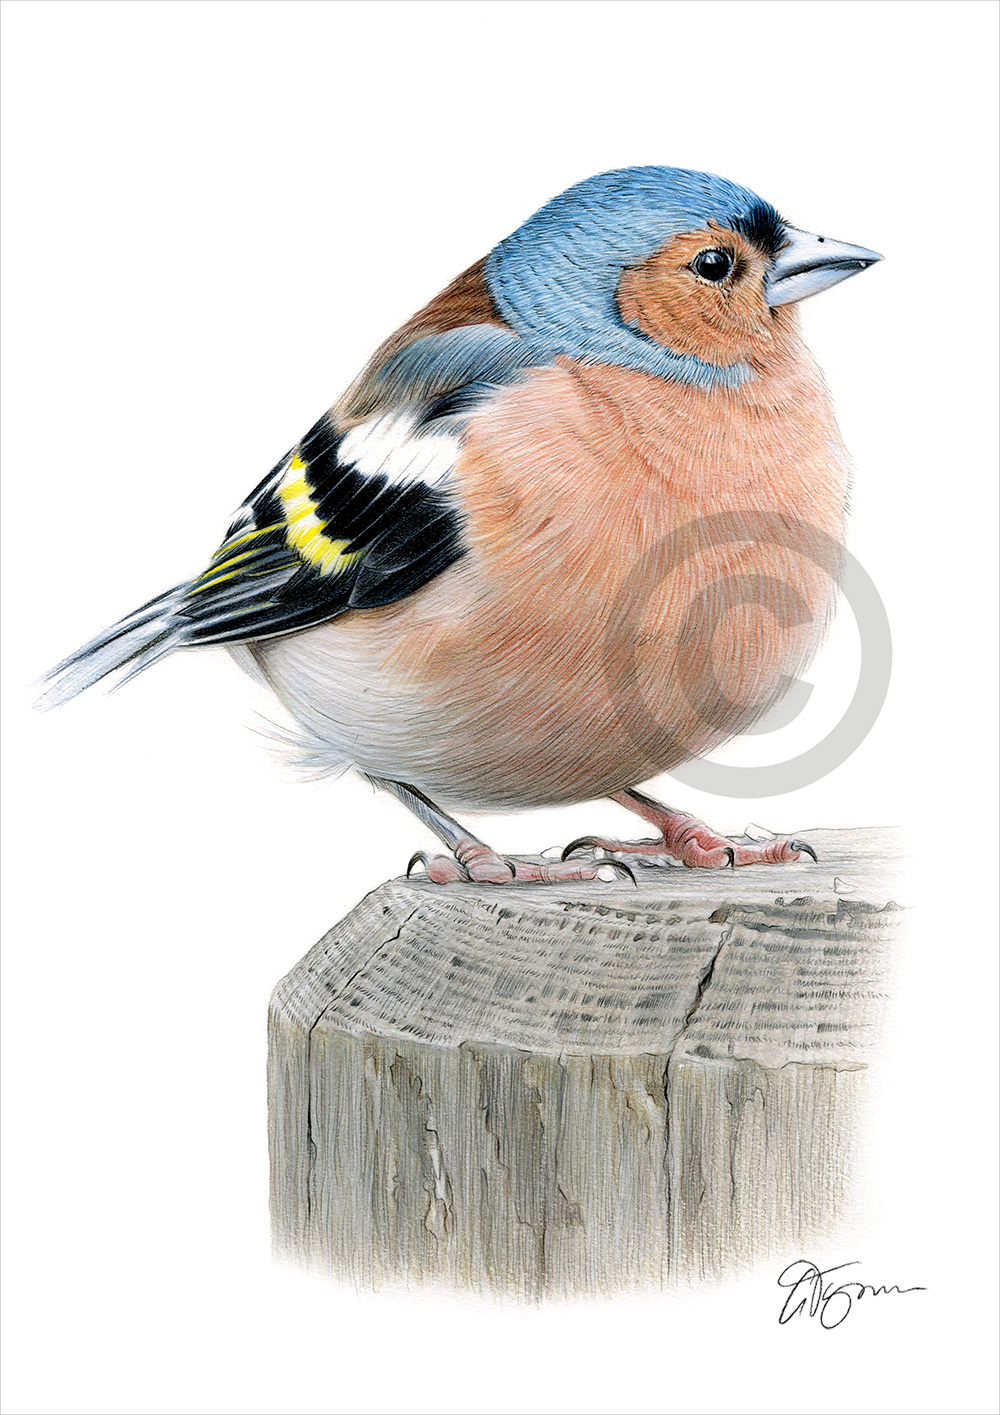 Colour pencil drawing of a chaffinch by artist Gary Tymon